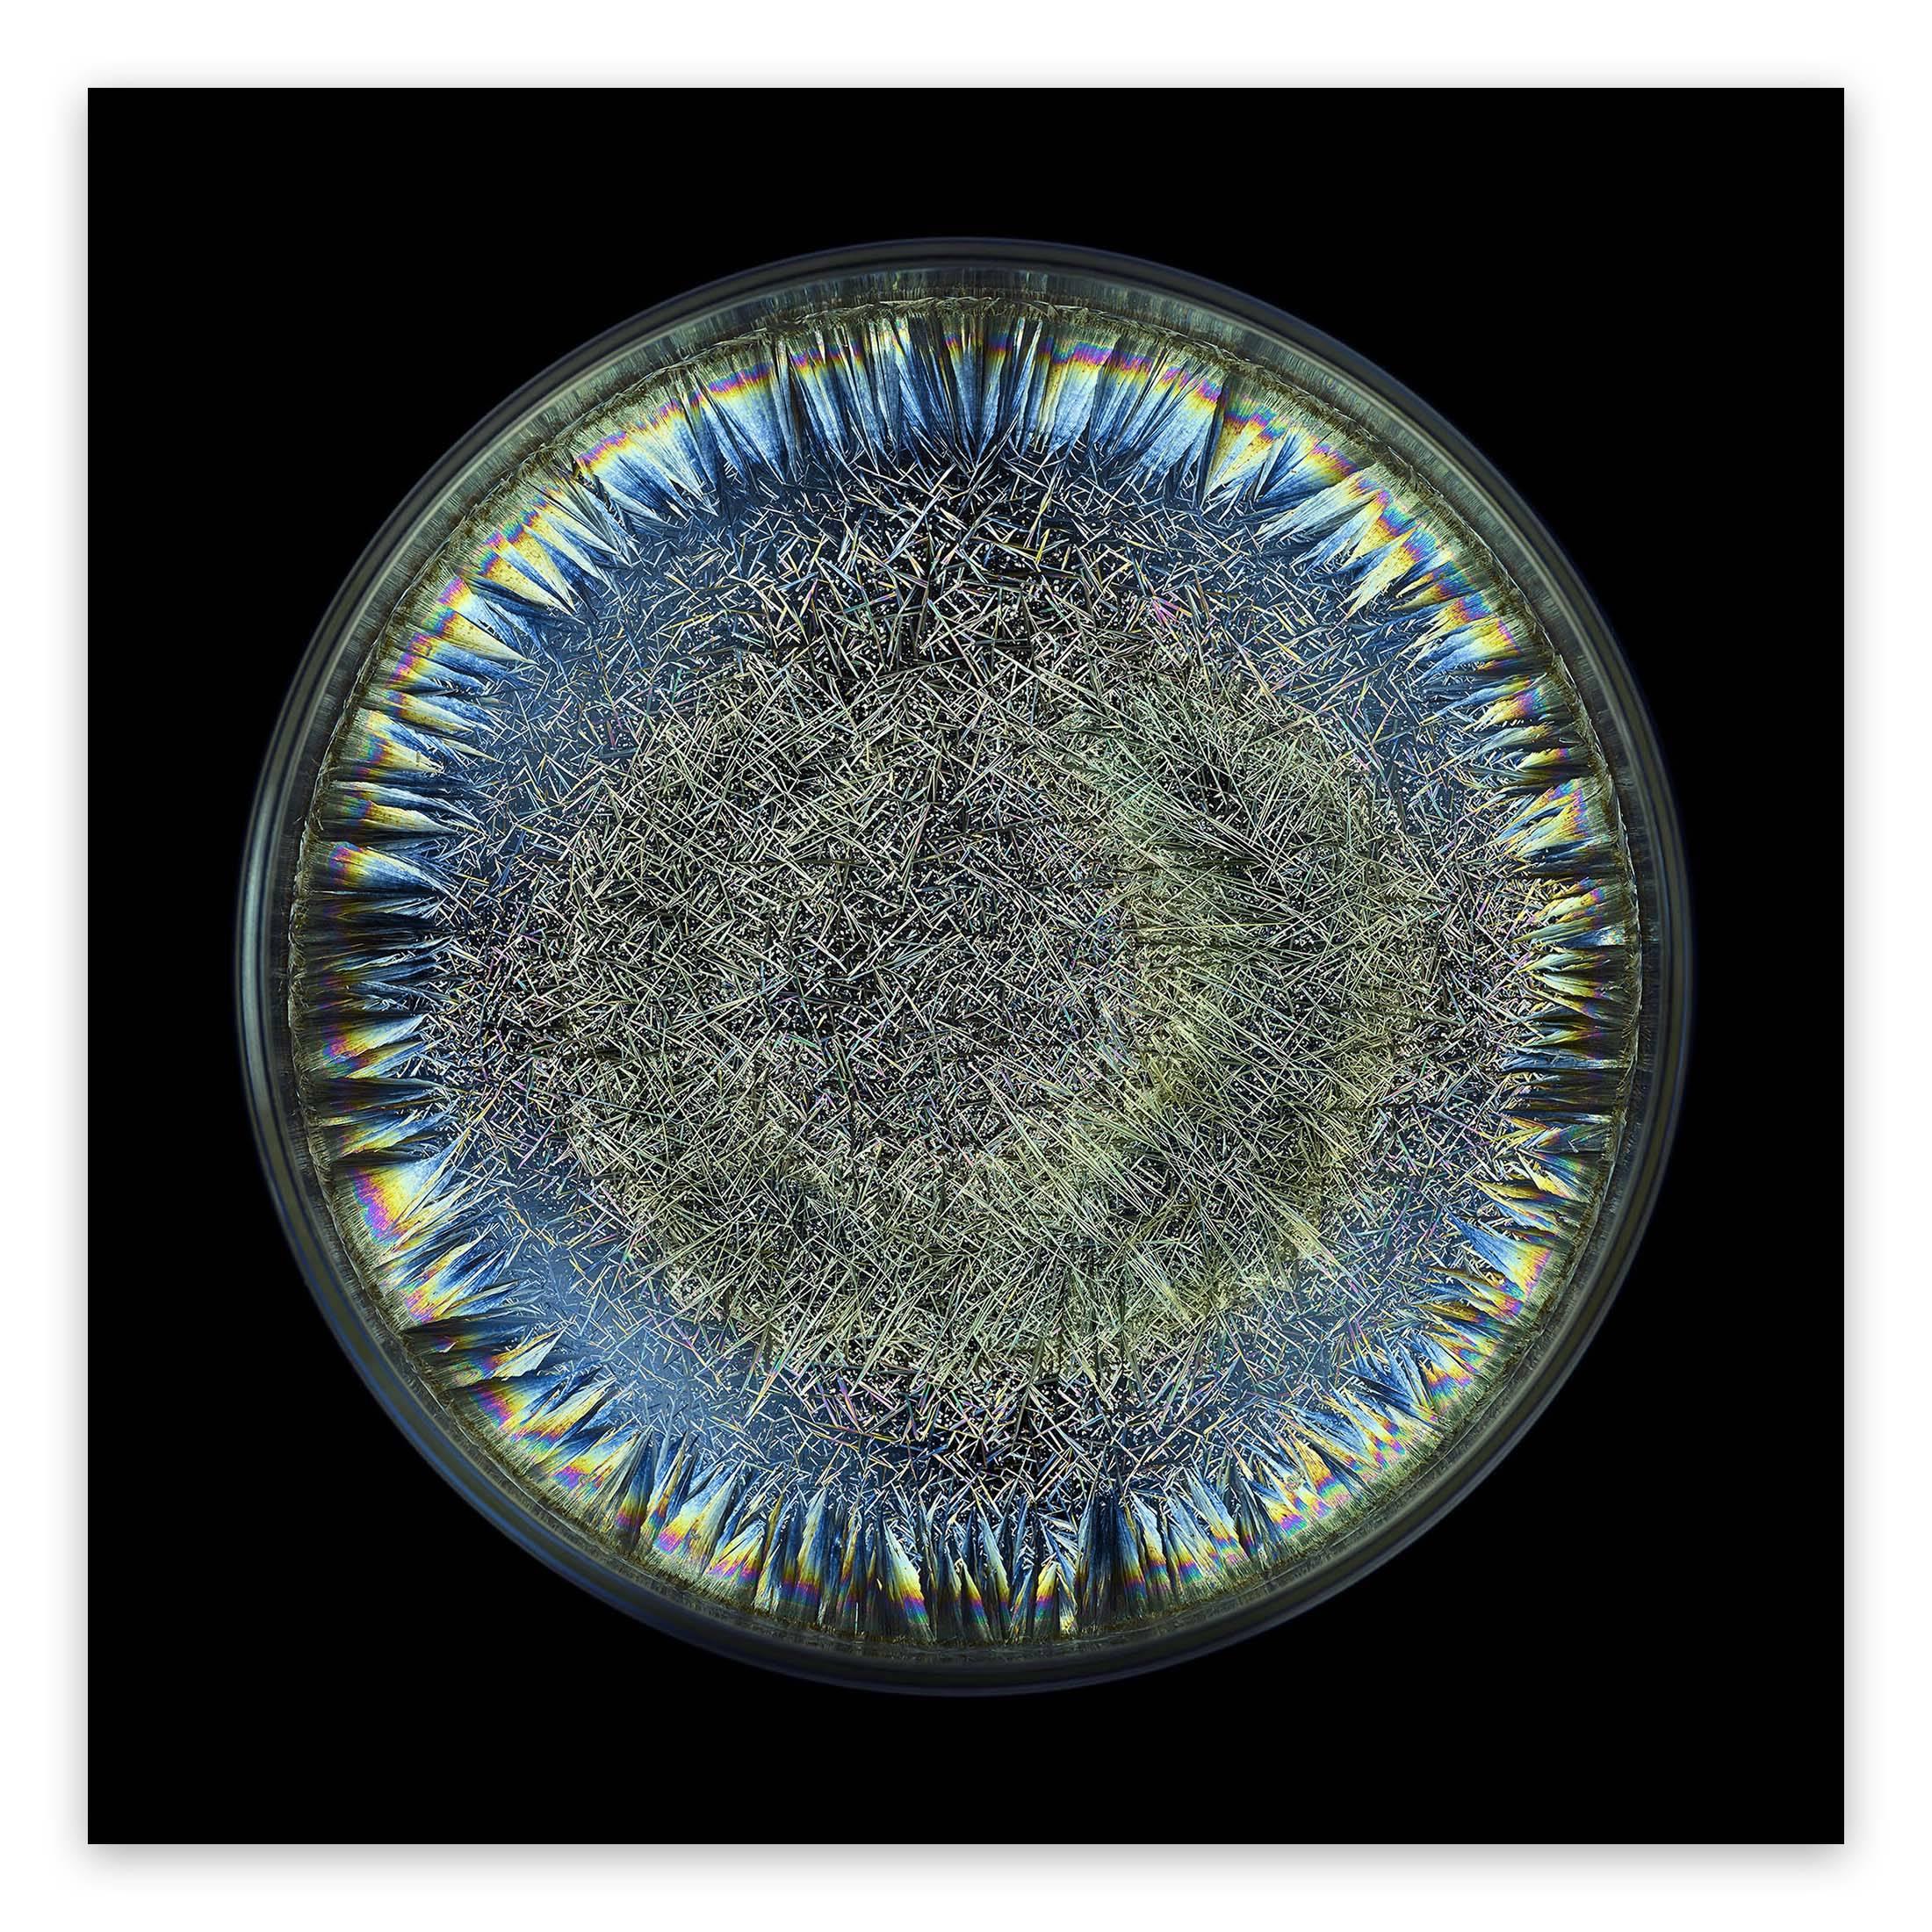 Morphogenetic field - AB negative blood (Abstract Photography)

Chromogenic print. Edition 1/5.

In his Morphogenetic fields series, Janiak examines the visible manifestation of the essence of various substances. Every entity in the universe